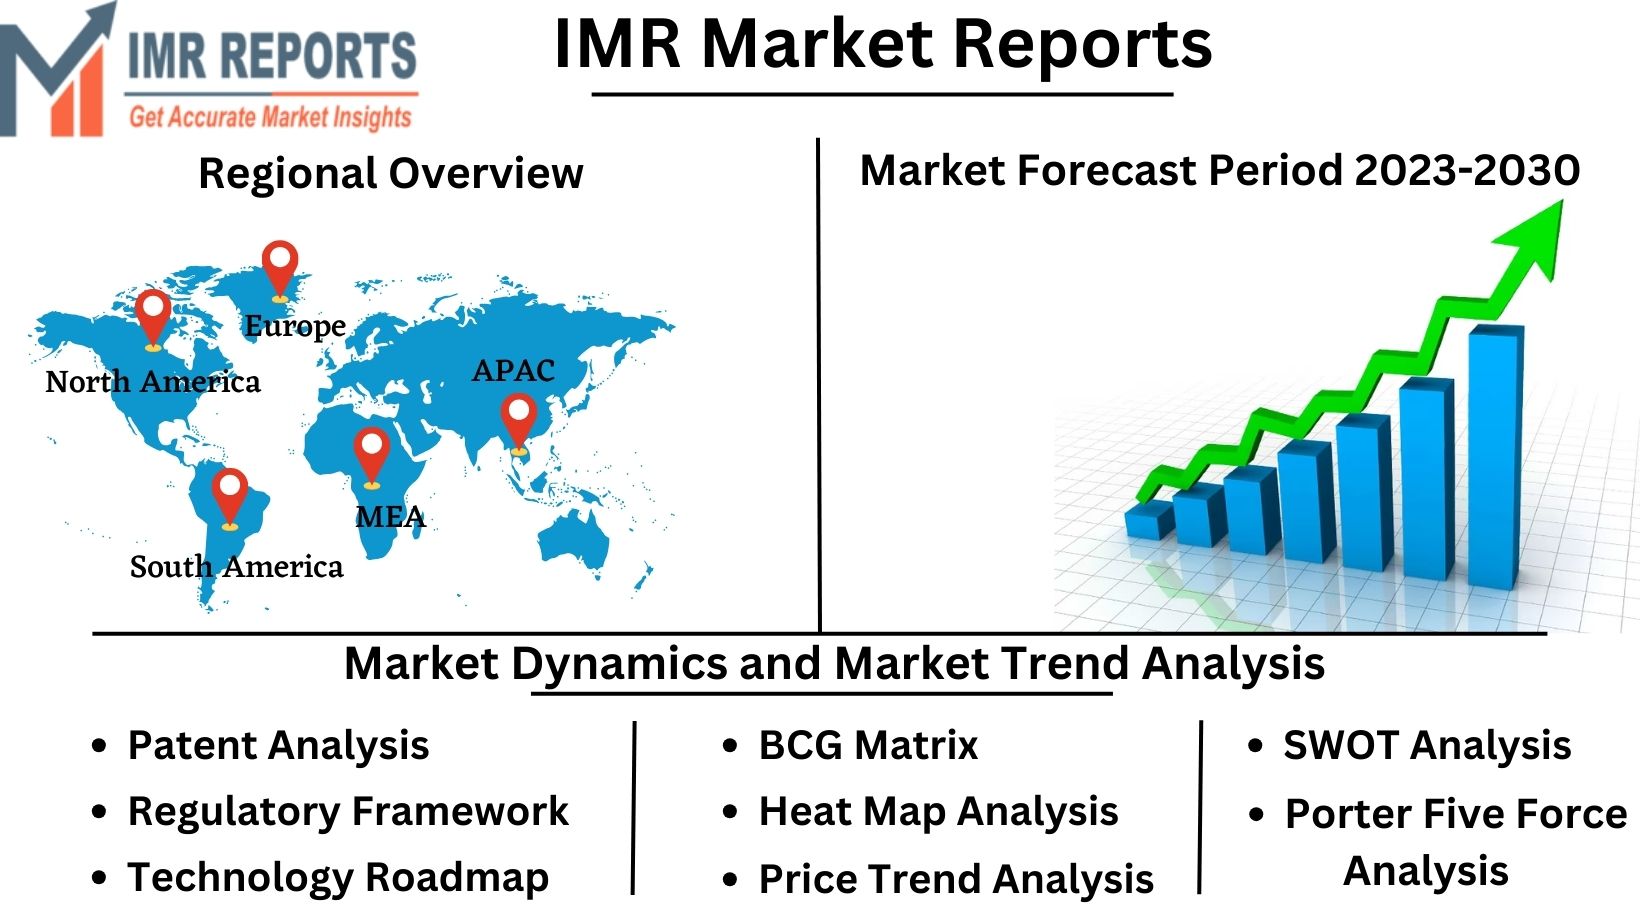 IMR_Market_Reports_000239